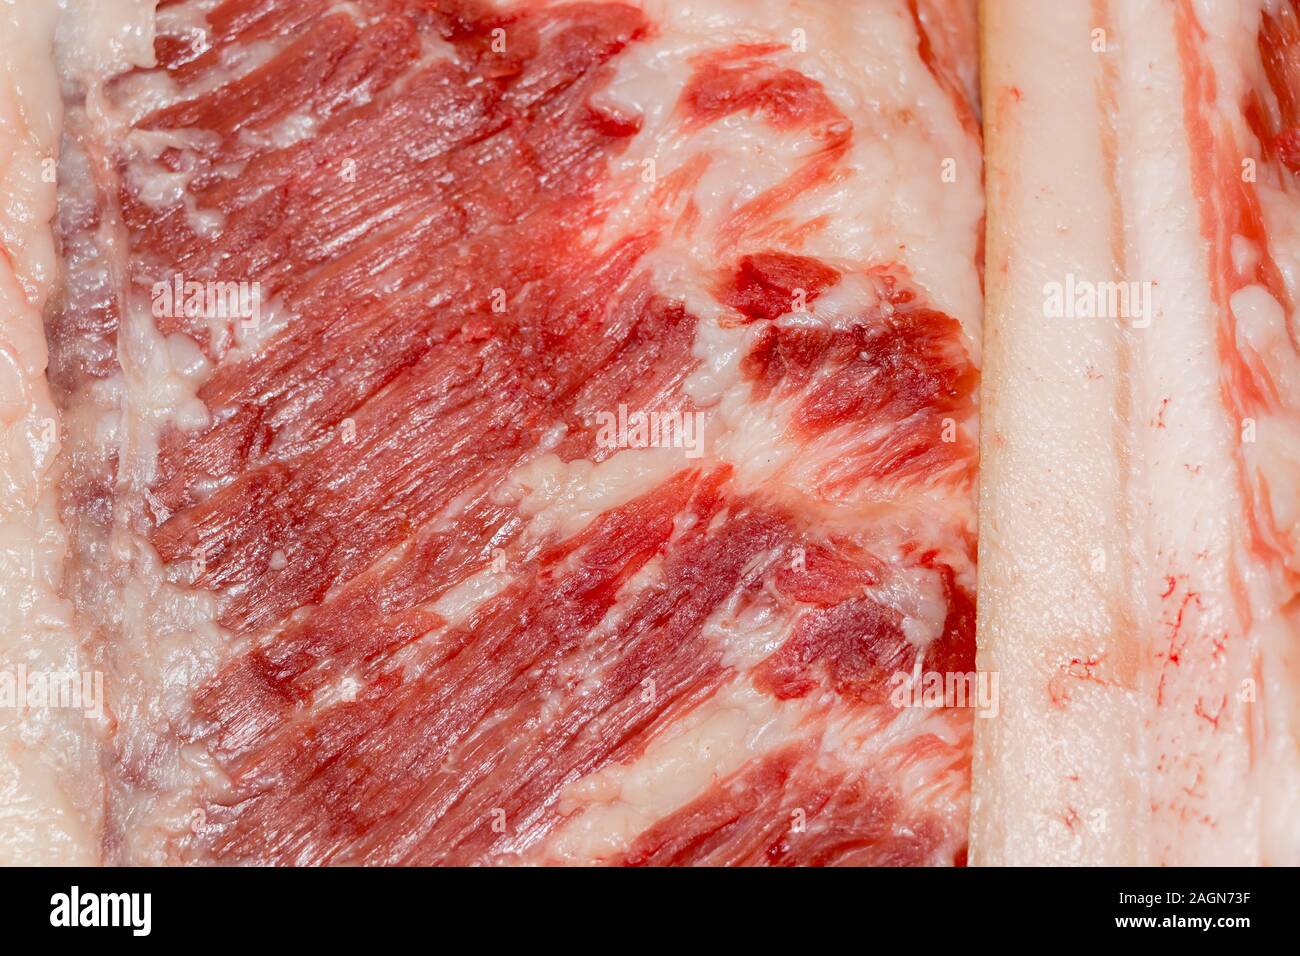 Education anatomy and Histological sample of Muscle tissue and Adipose tissue close up. Selective focus. Animal tissues Stock Photo